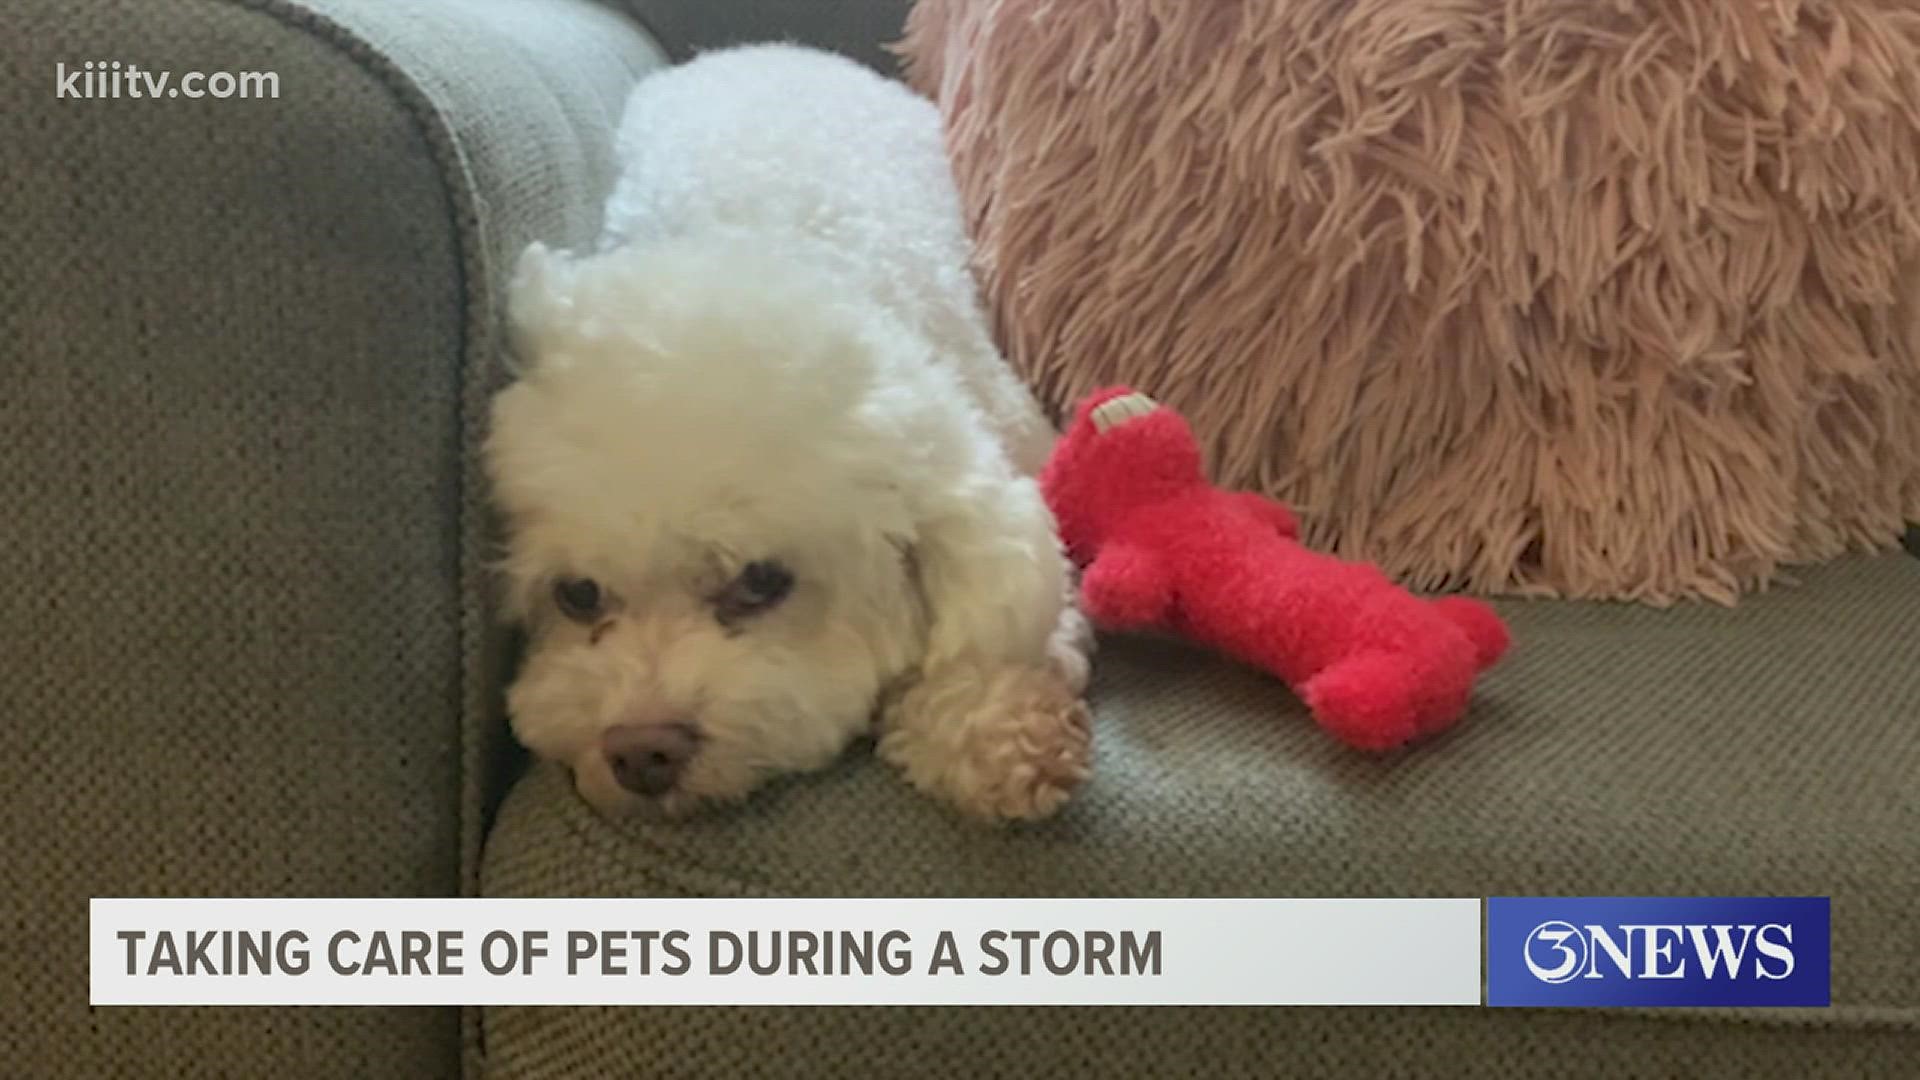 3News spoke with the Gulf Coast Humane Society and they shared a few tips on what to do if your pet gets anxious due to thunder or heavy rain.